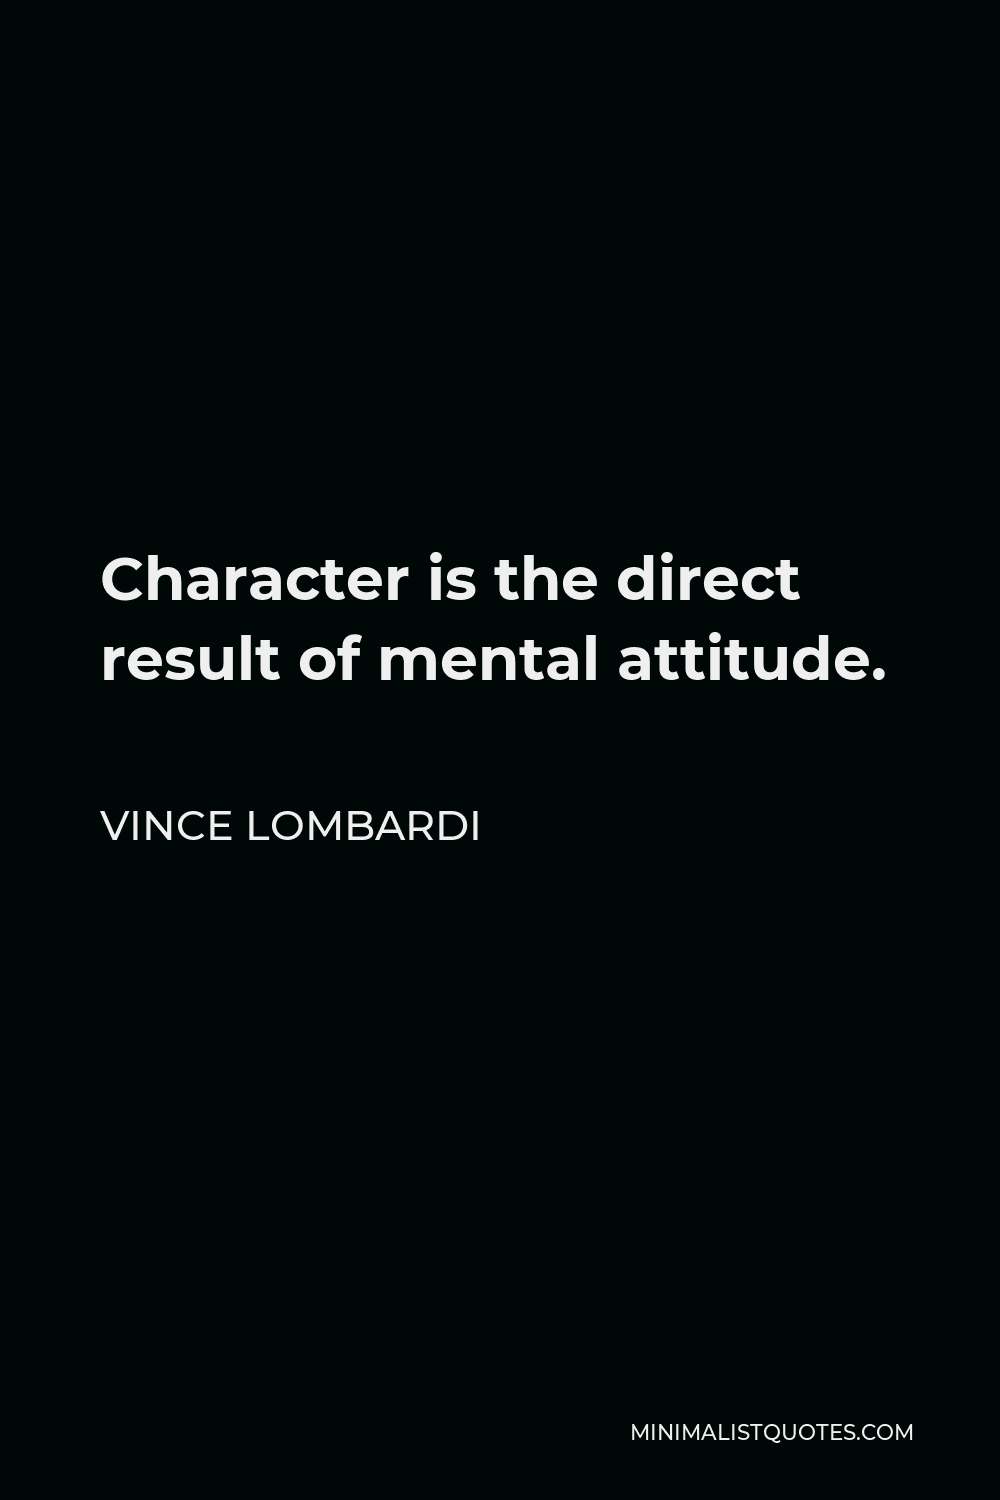 Vince Lombardi Quote - Character is the direct result of mental attitude.